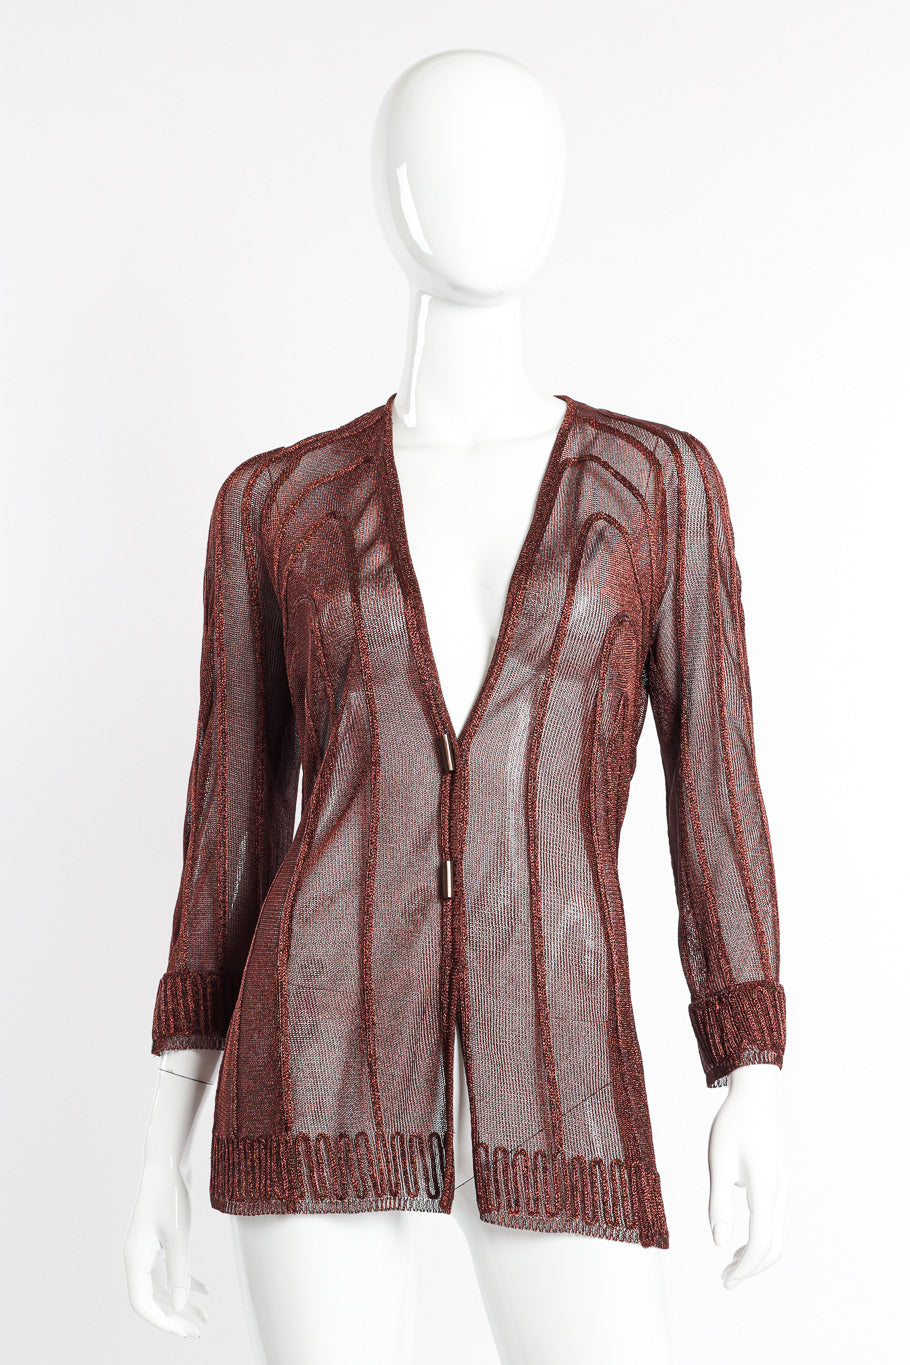 Vintage Thierry Mugler Metallic Cable Cardigan front on mannequin @recessla